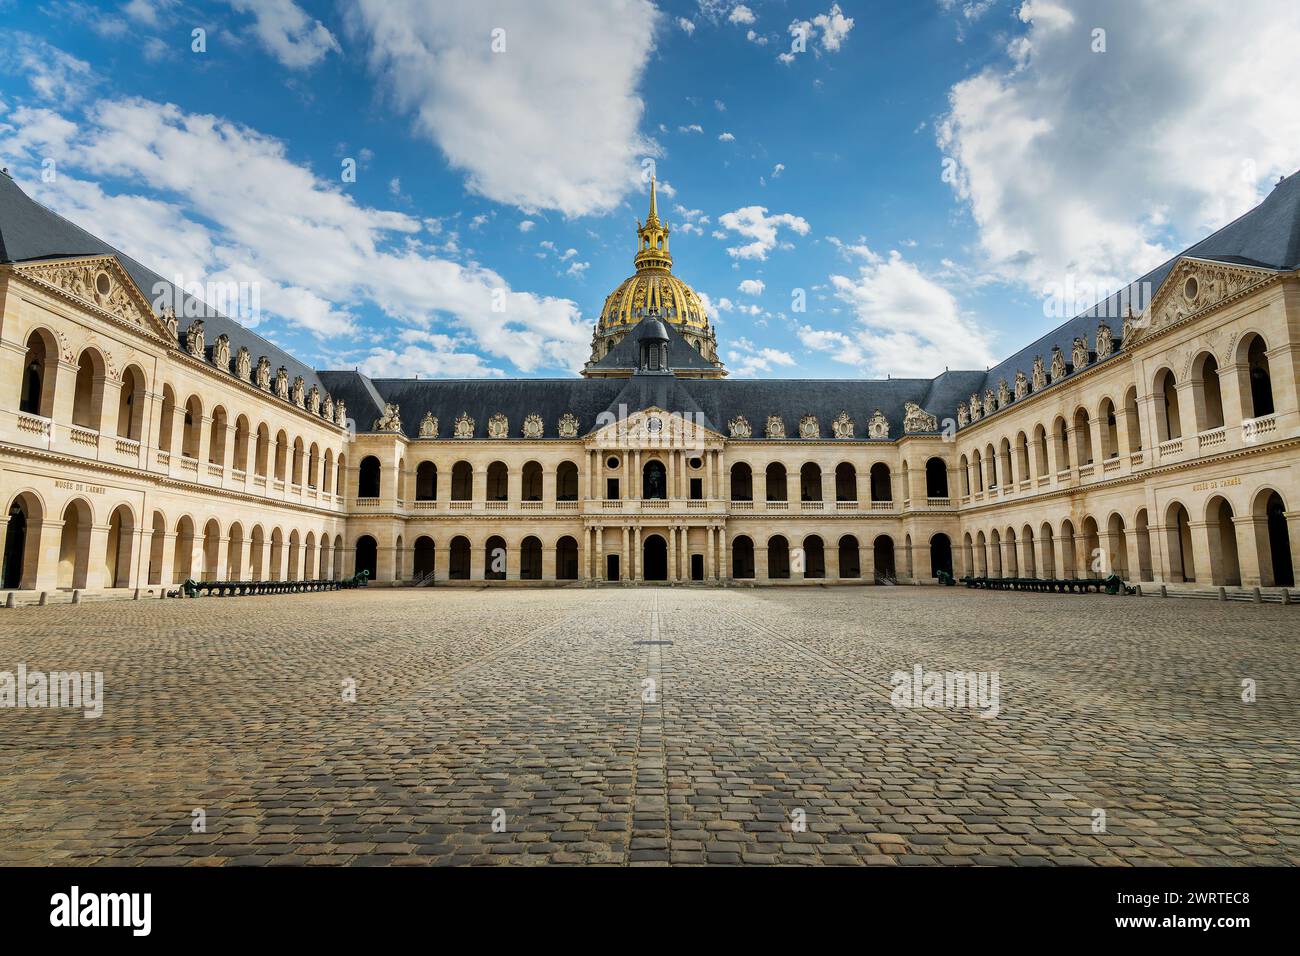 Court of honor of the Hotel des Invalides, famous monument in Paris, France Stock Photo